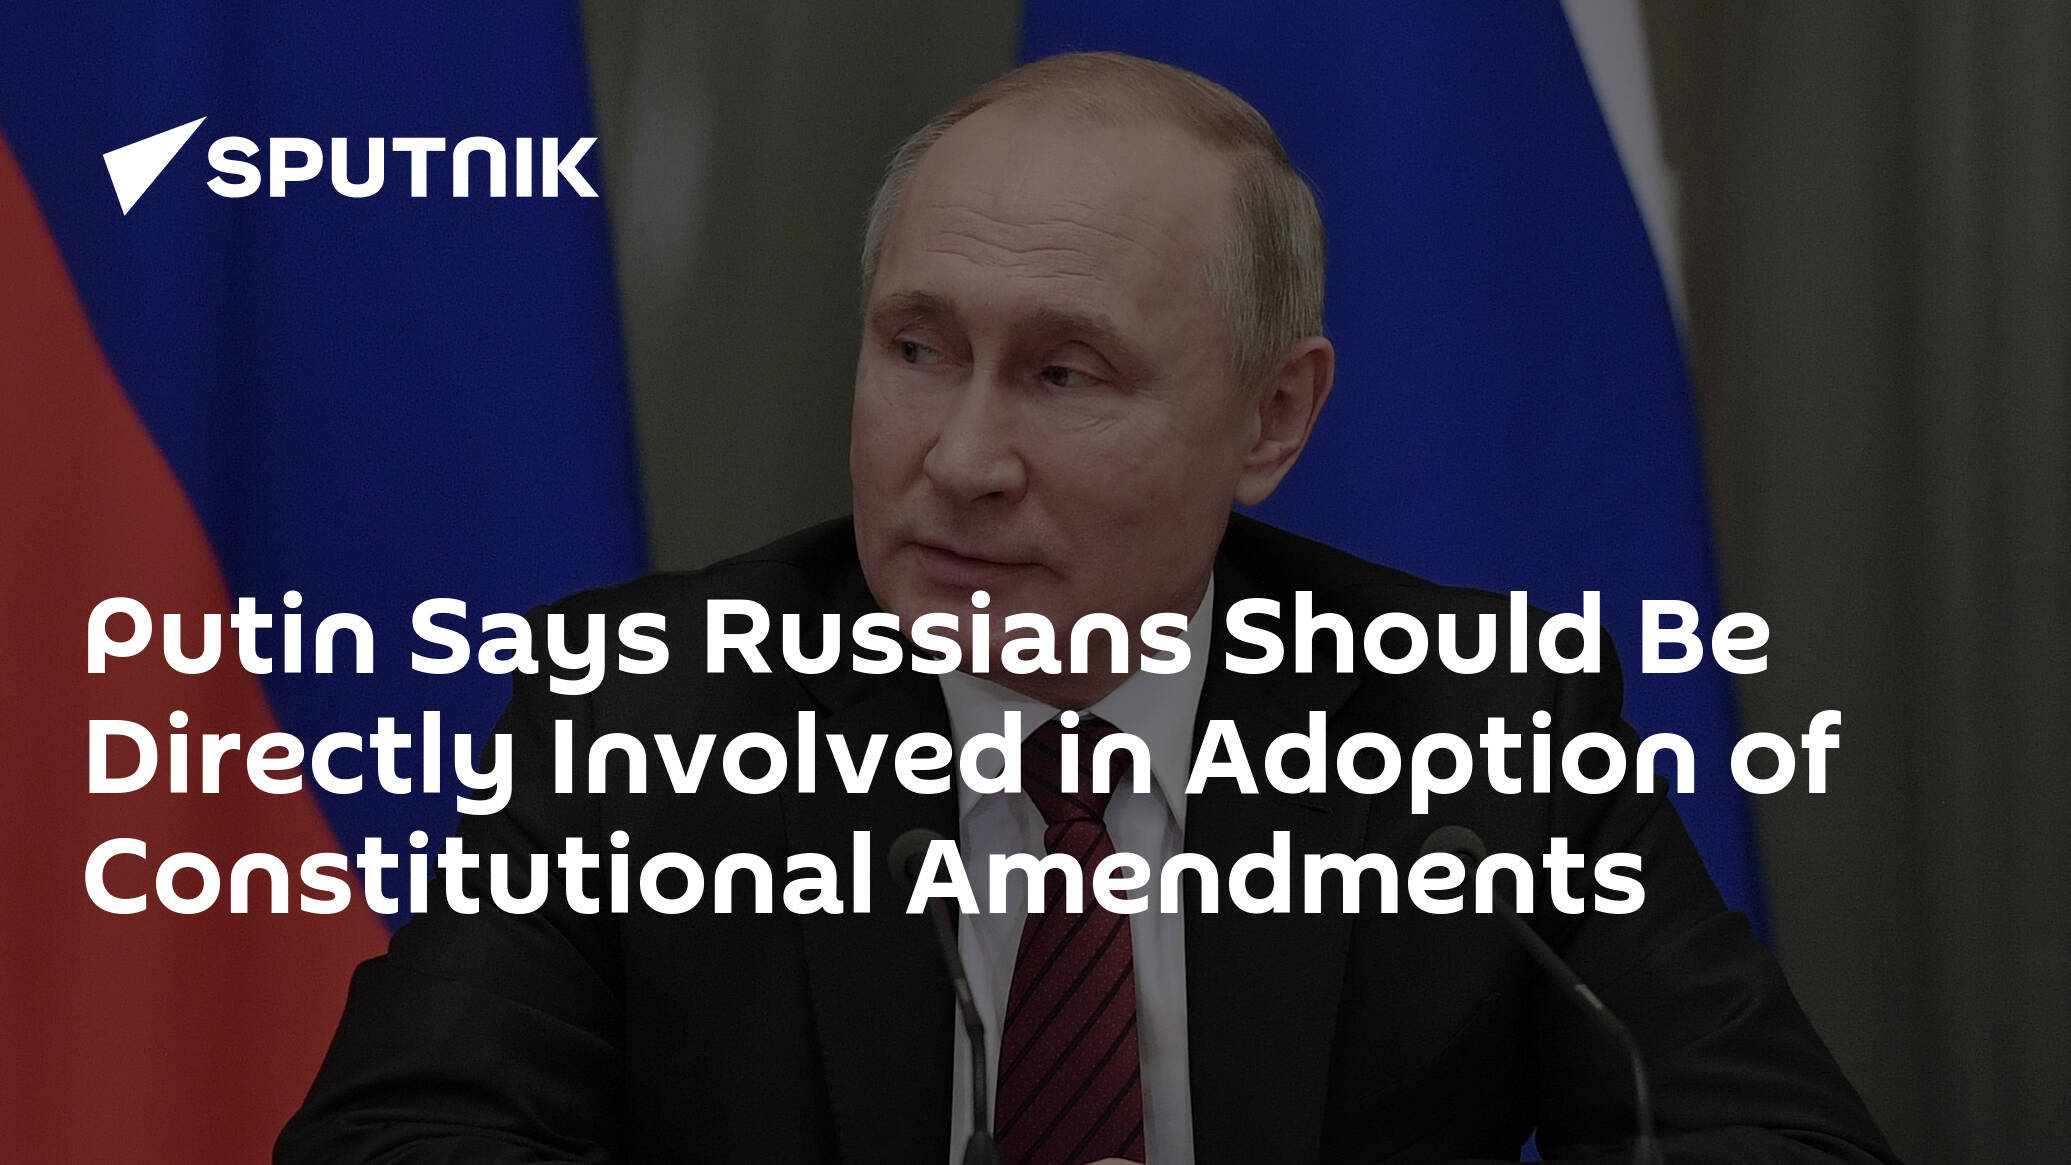 Putin Says Russians Should Be Directly Involved In Adoption Of Constitutional Amendments 1302 1926